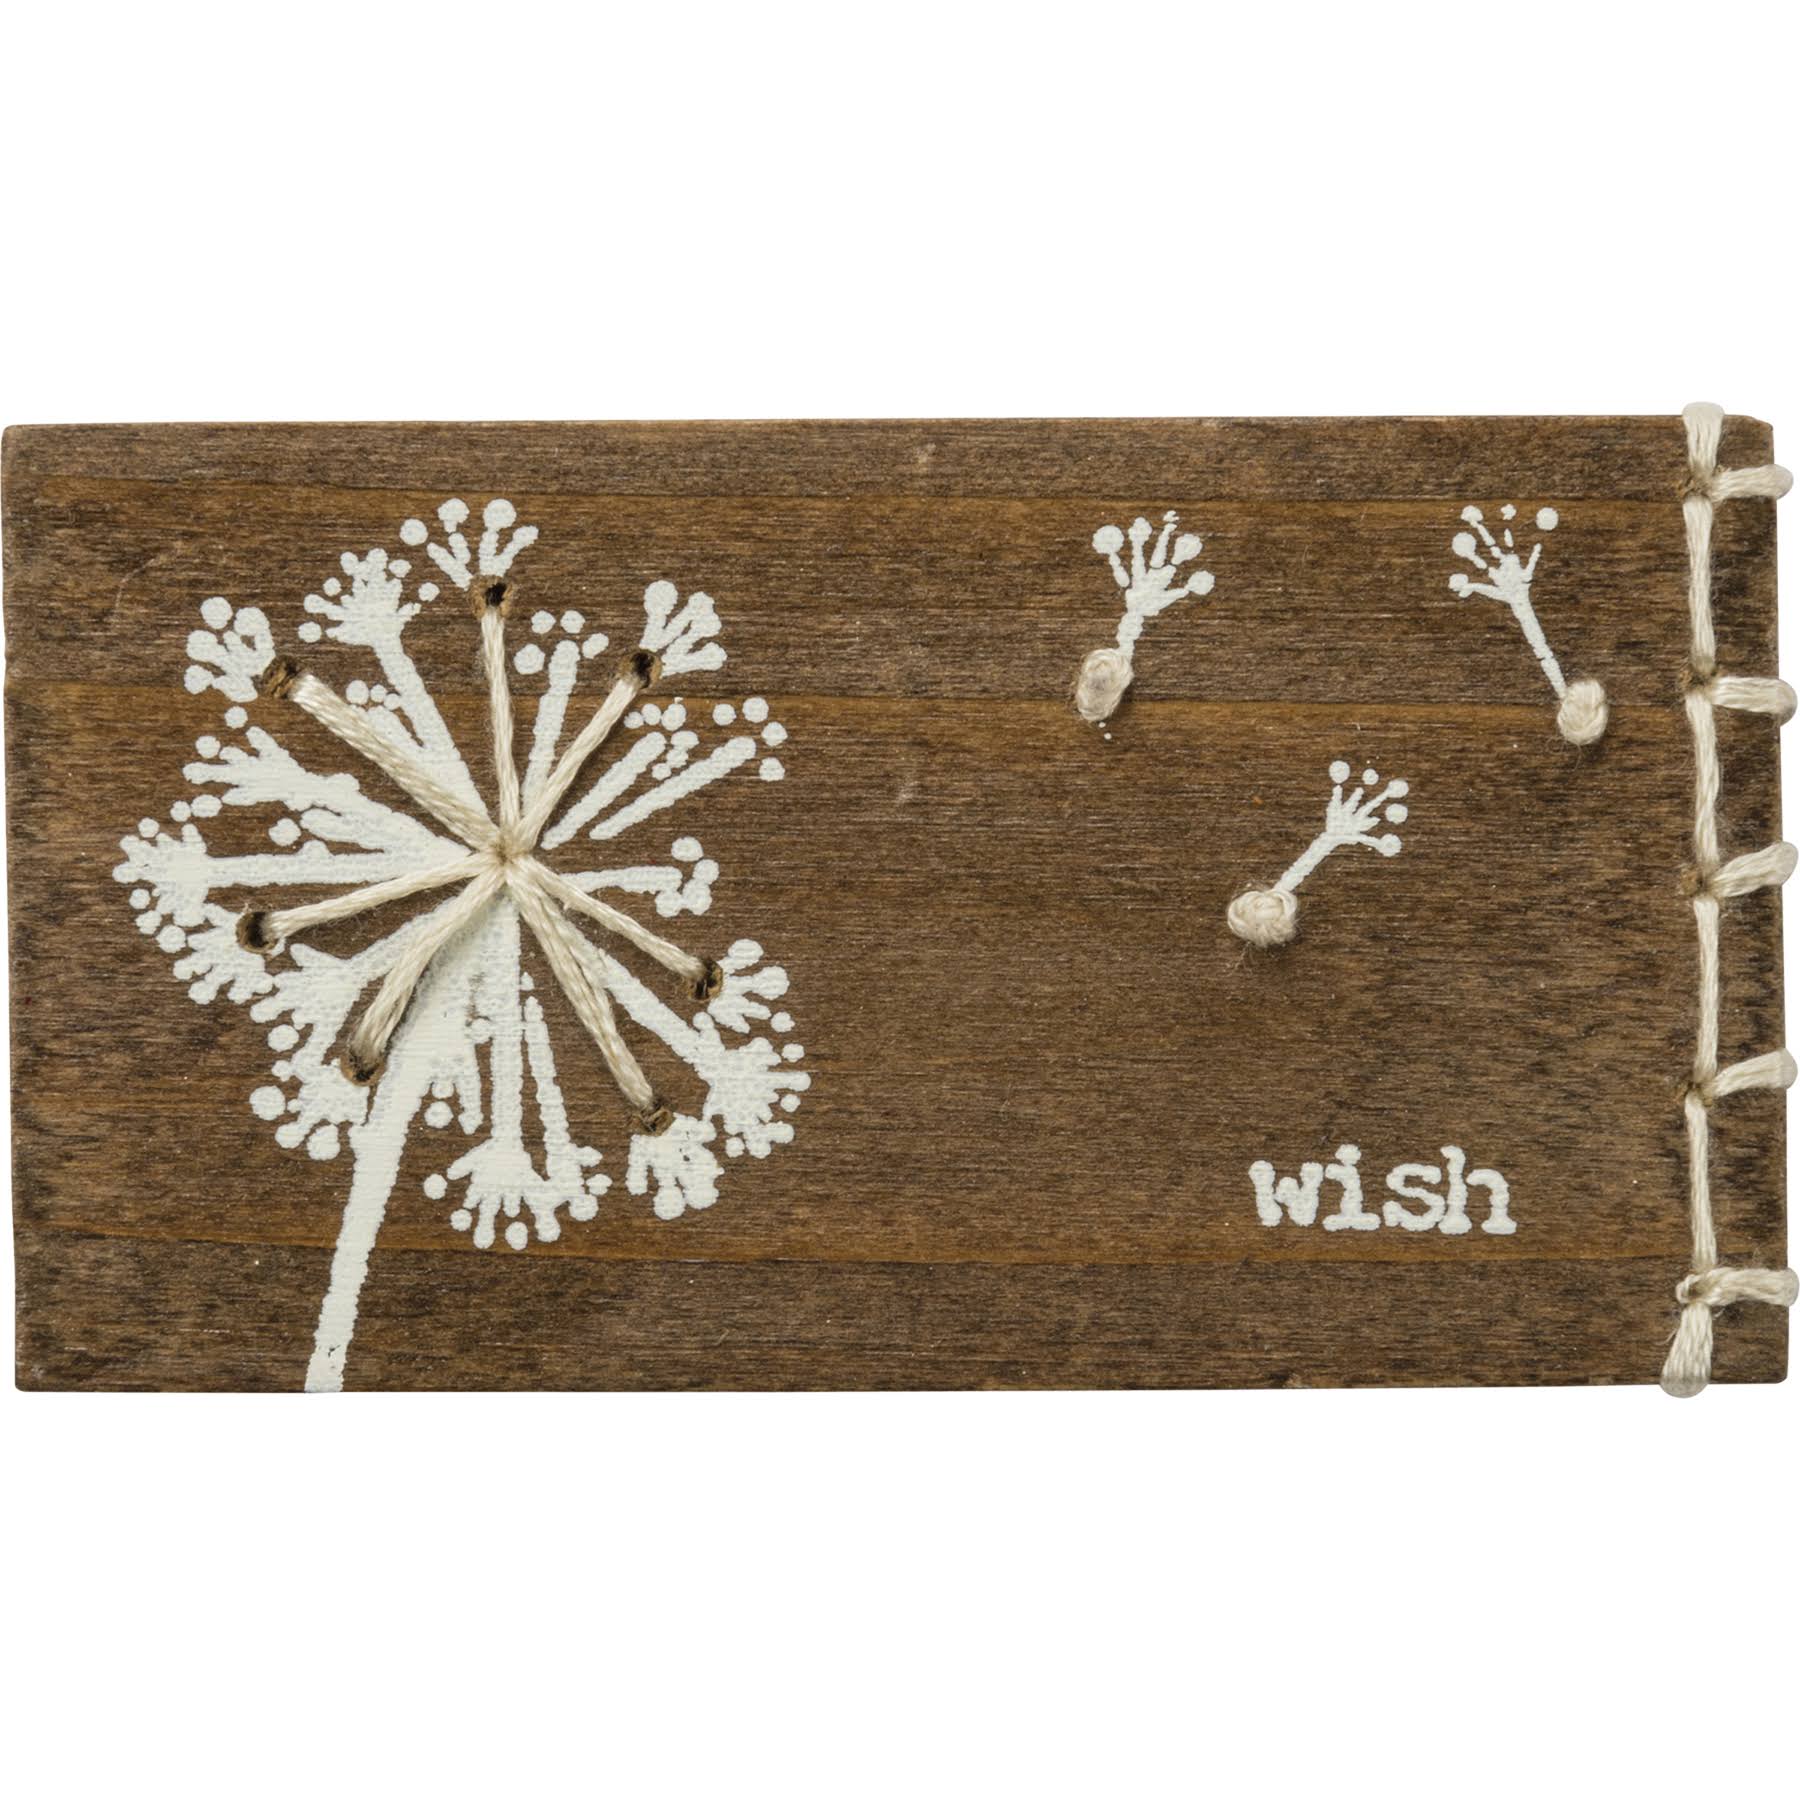 Primitives by Kathy Stitched Block Magnet - Wish - 1.75 x 3.25 Inches